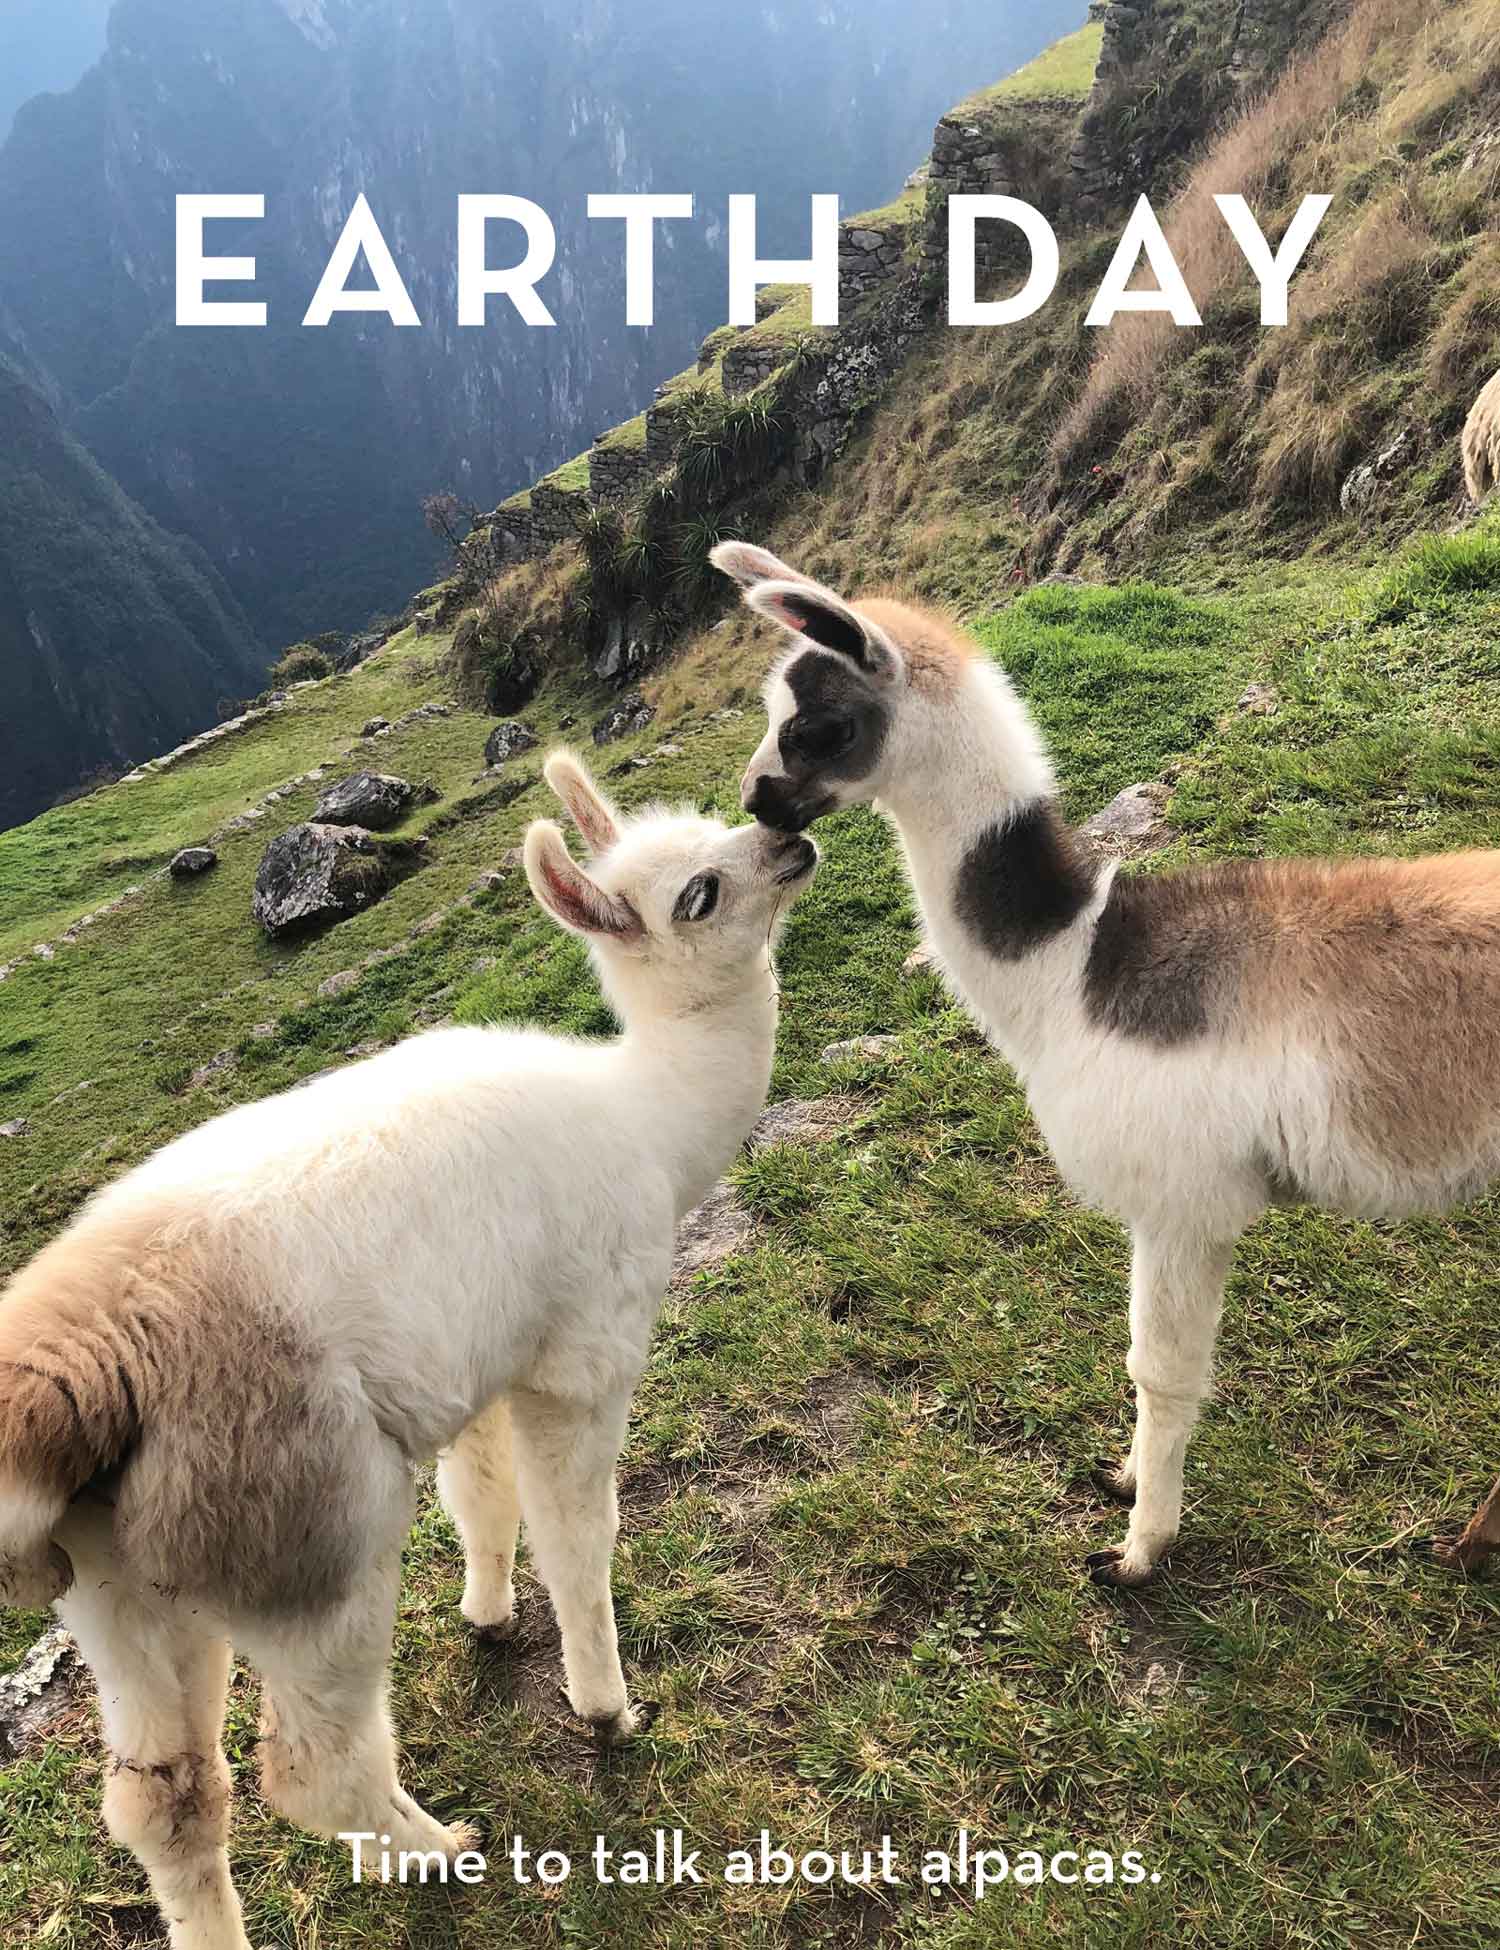 Earth Day - Alpacas of the South American Highlands and How You Can Help